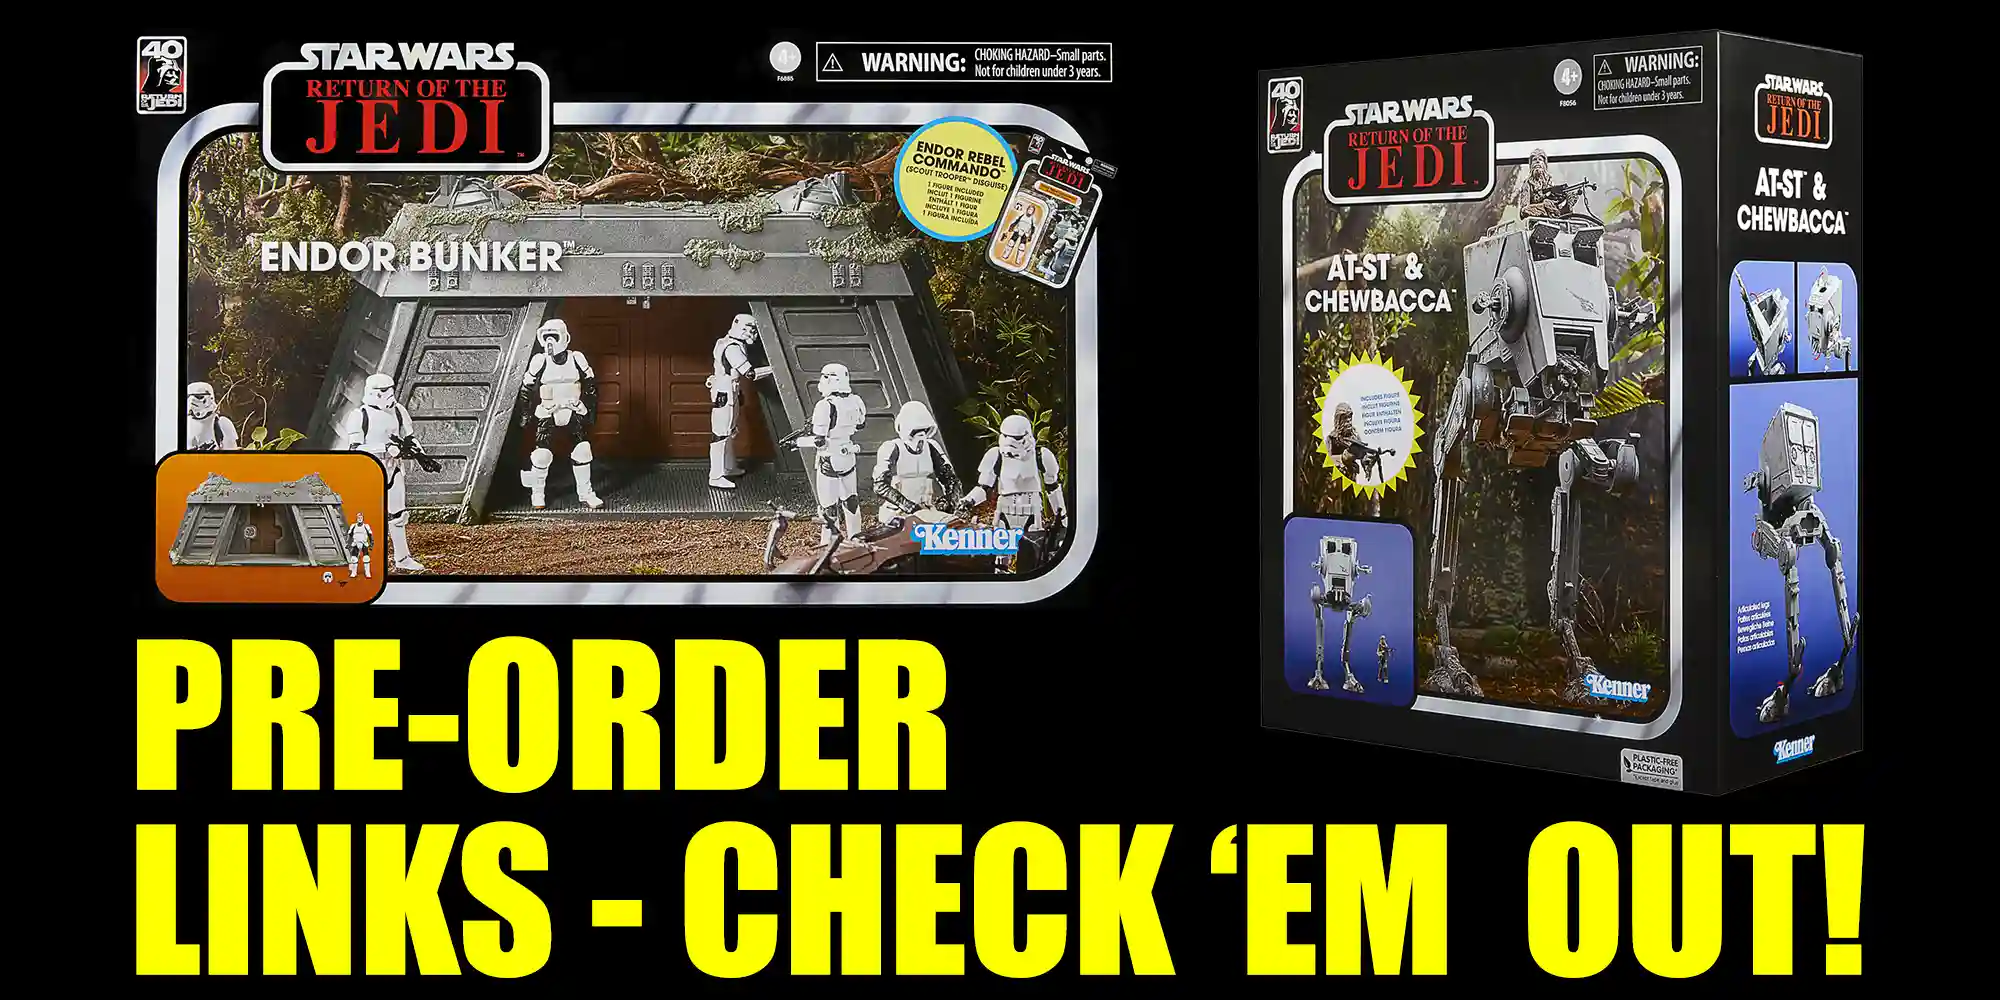 Endor Bunker Playset & AT-ST - A First Look - Check 'EM Out!